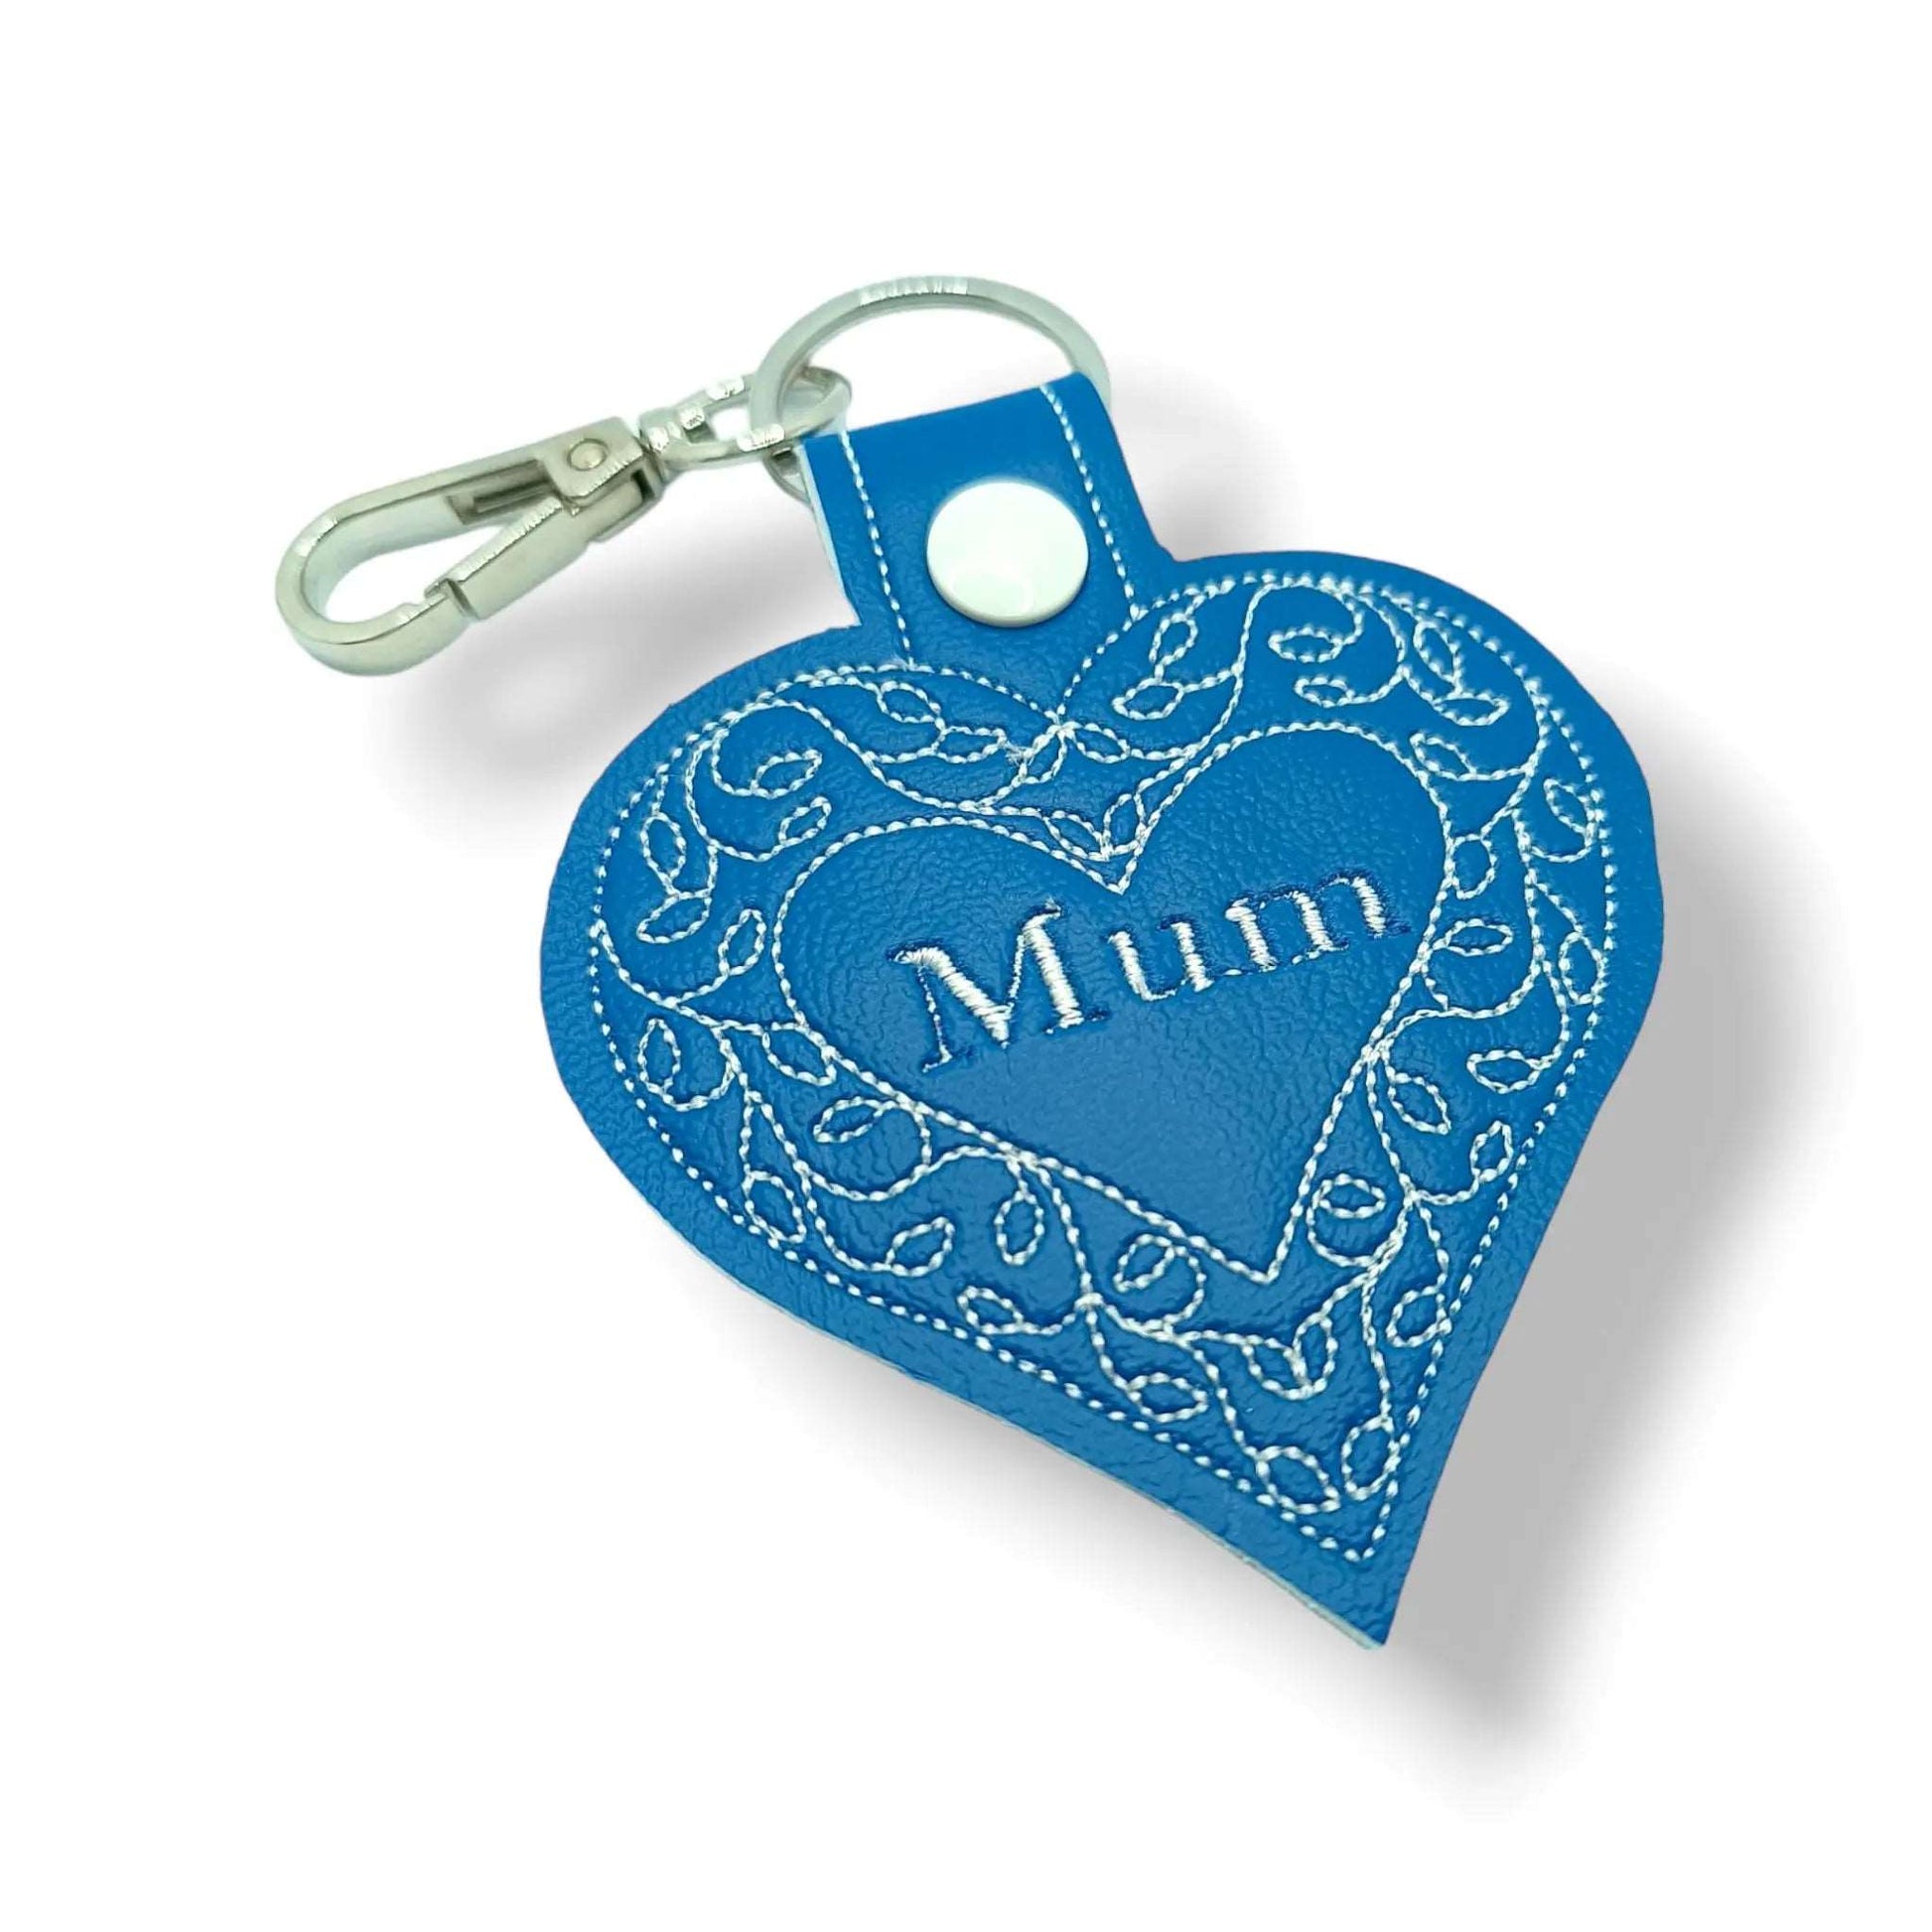 Express Your Love for Mum with a Vinyl Heart Keychain, made in Australia - Image #3